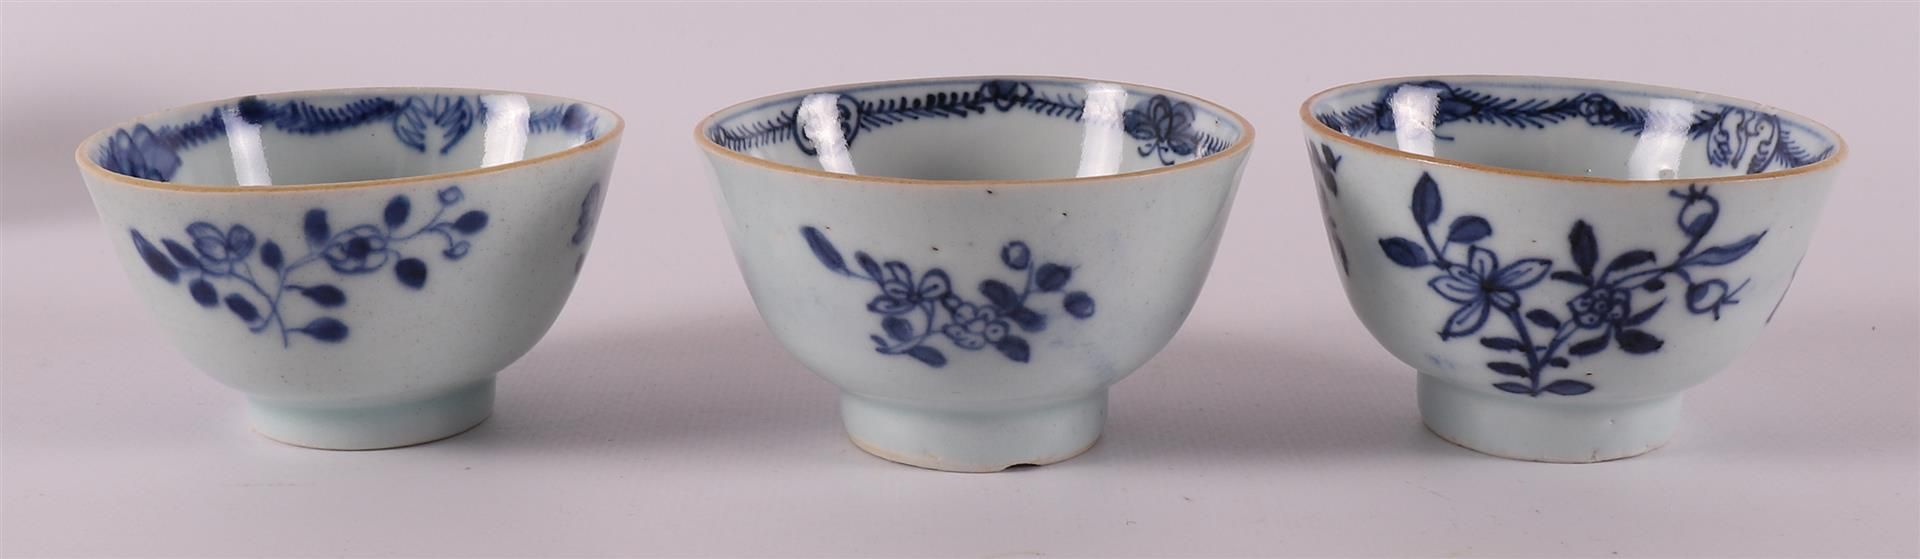 Six blue/white porcelain cups and saucers, China, Qianlong, 18th century. - Image 11 of 20